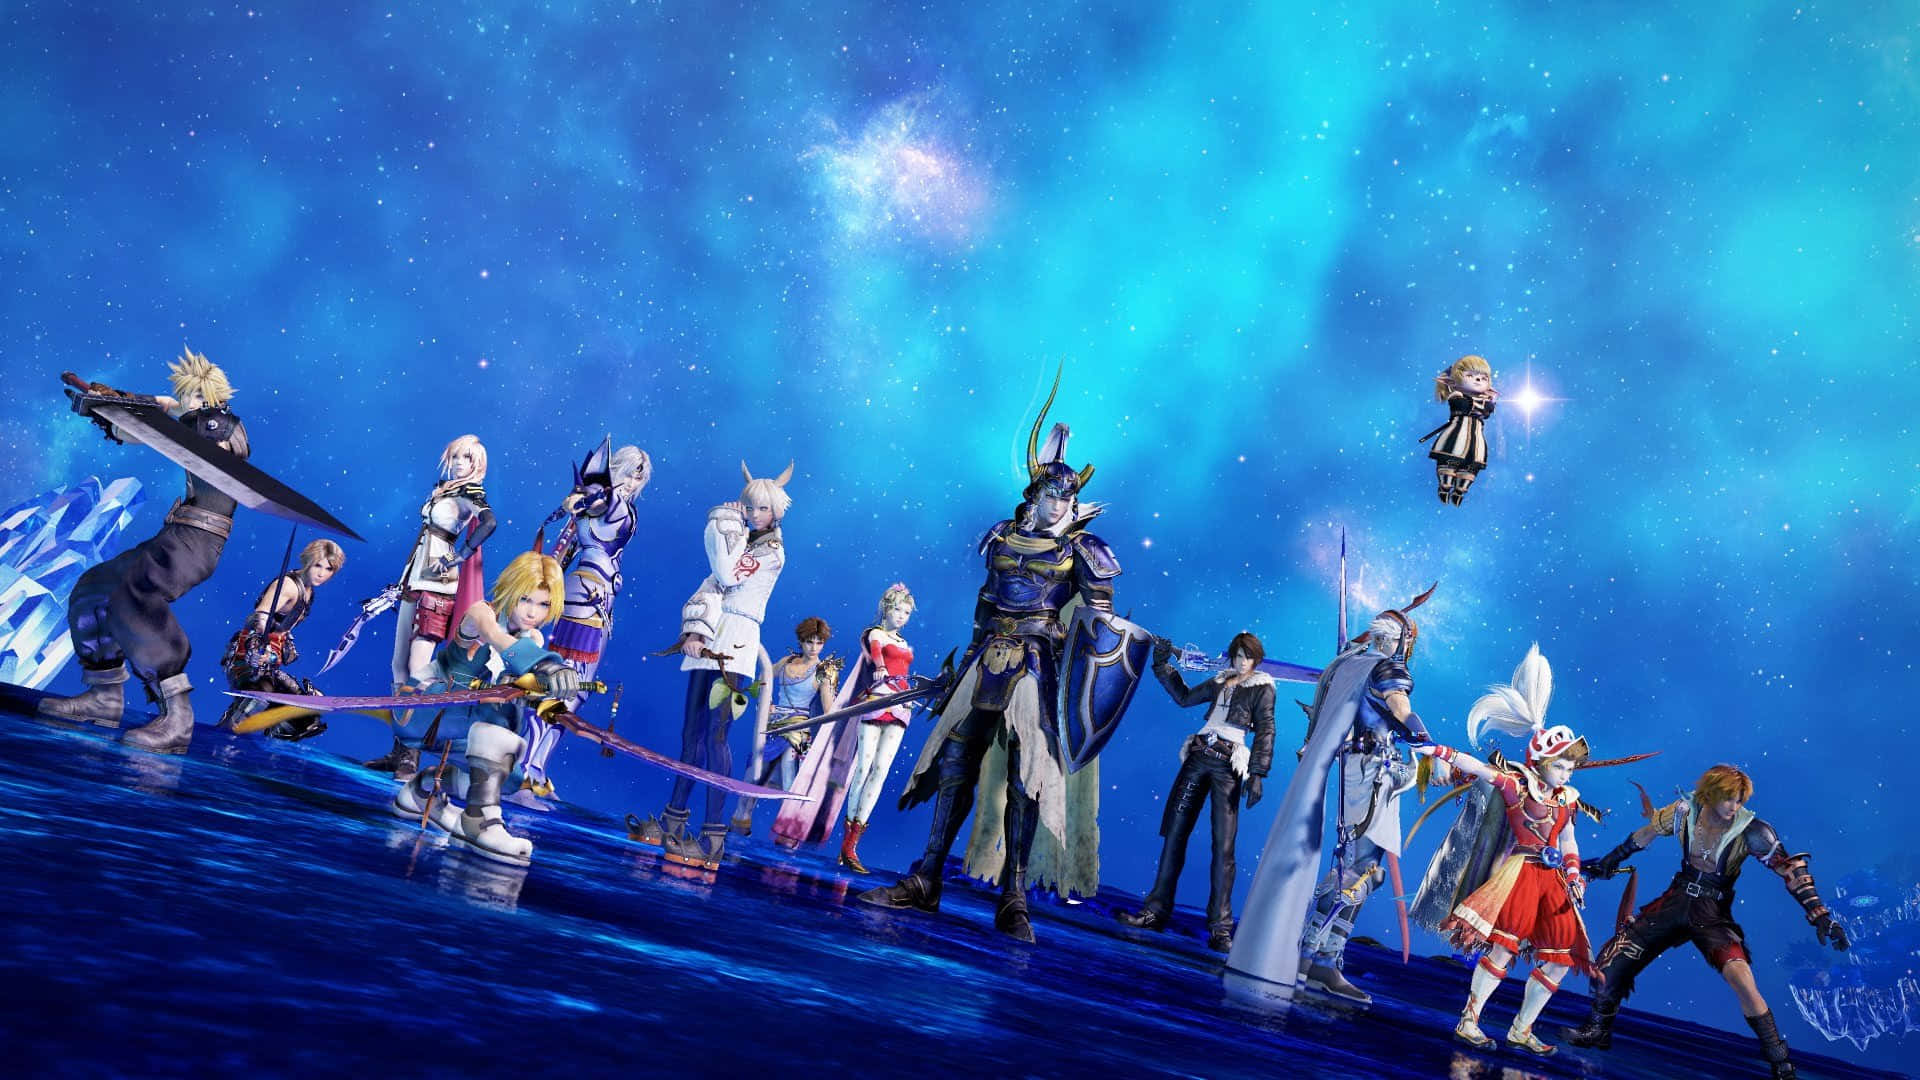 Epic Gathering of Iconic Final Fantasy Characters Wallpaper